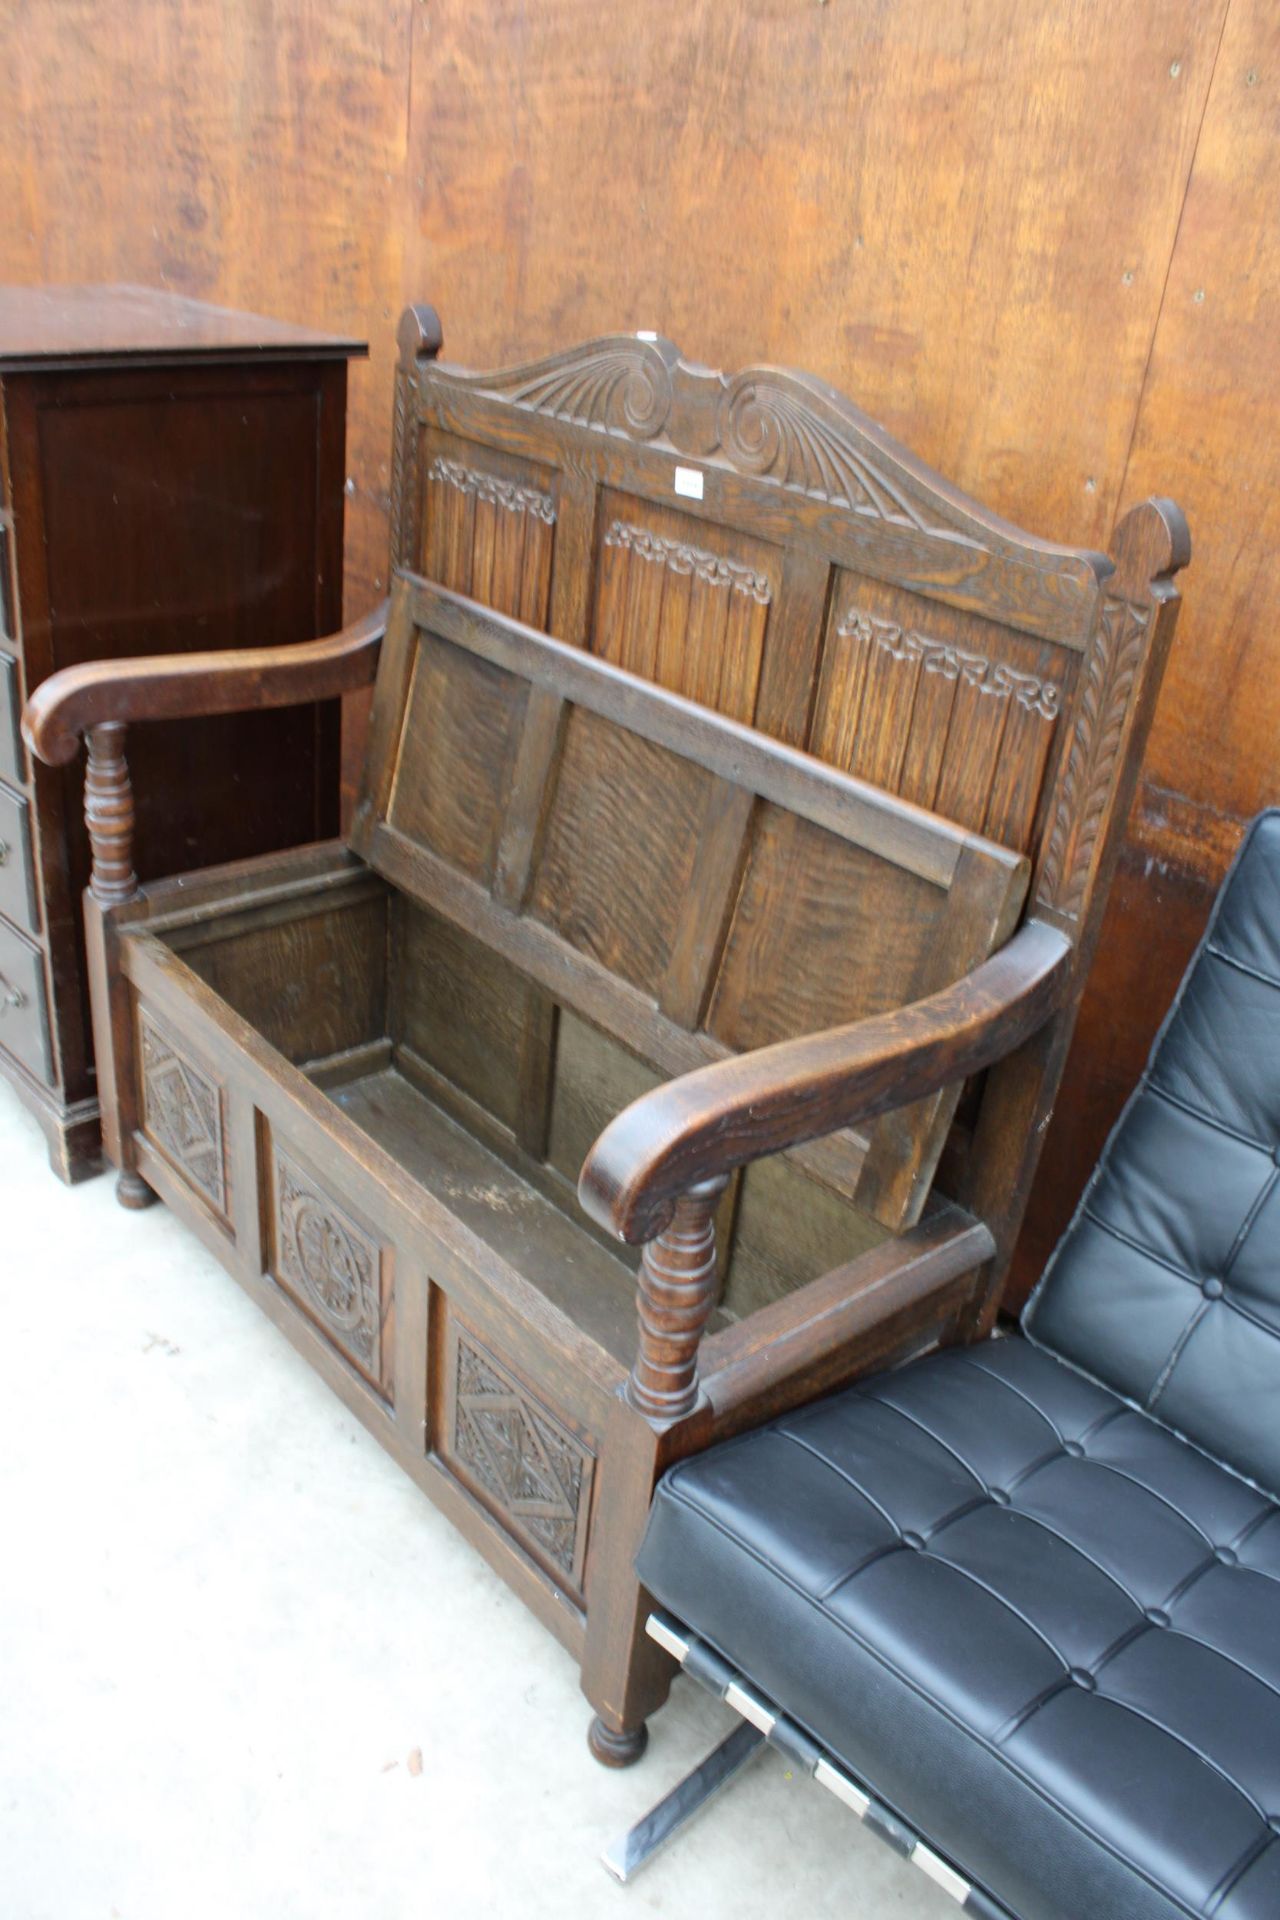 AN OAK JACOBEAN STYLE SETTLE WITH LINENFOLD BACK, CARVED PANEL FRONT AND LIFT-UP SEAT, 42" WIDE - Image 2 of 2